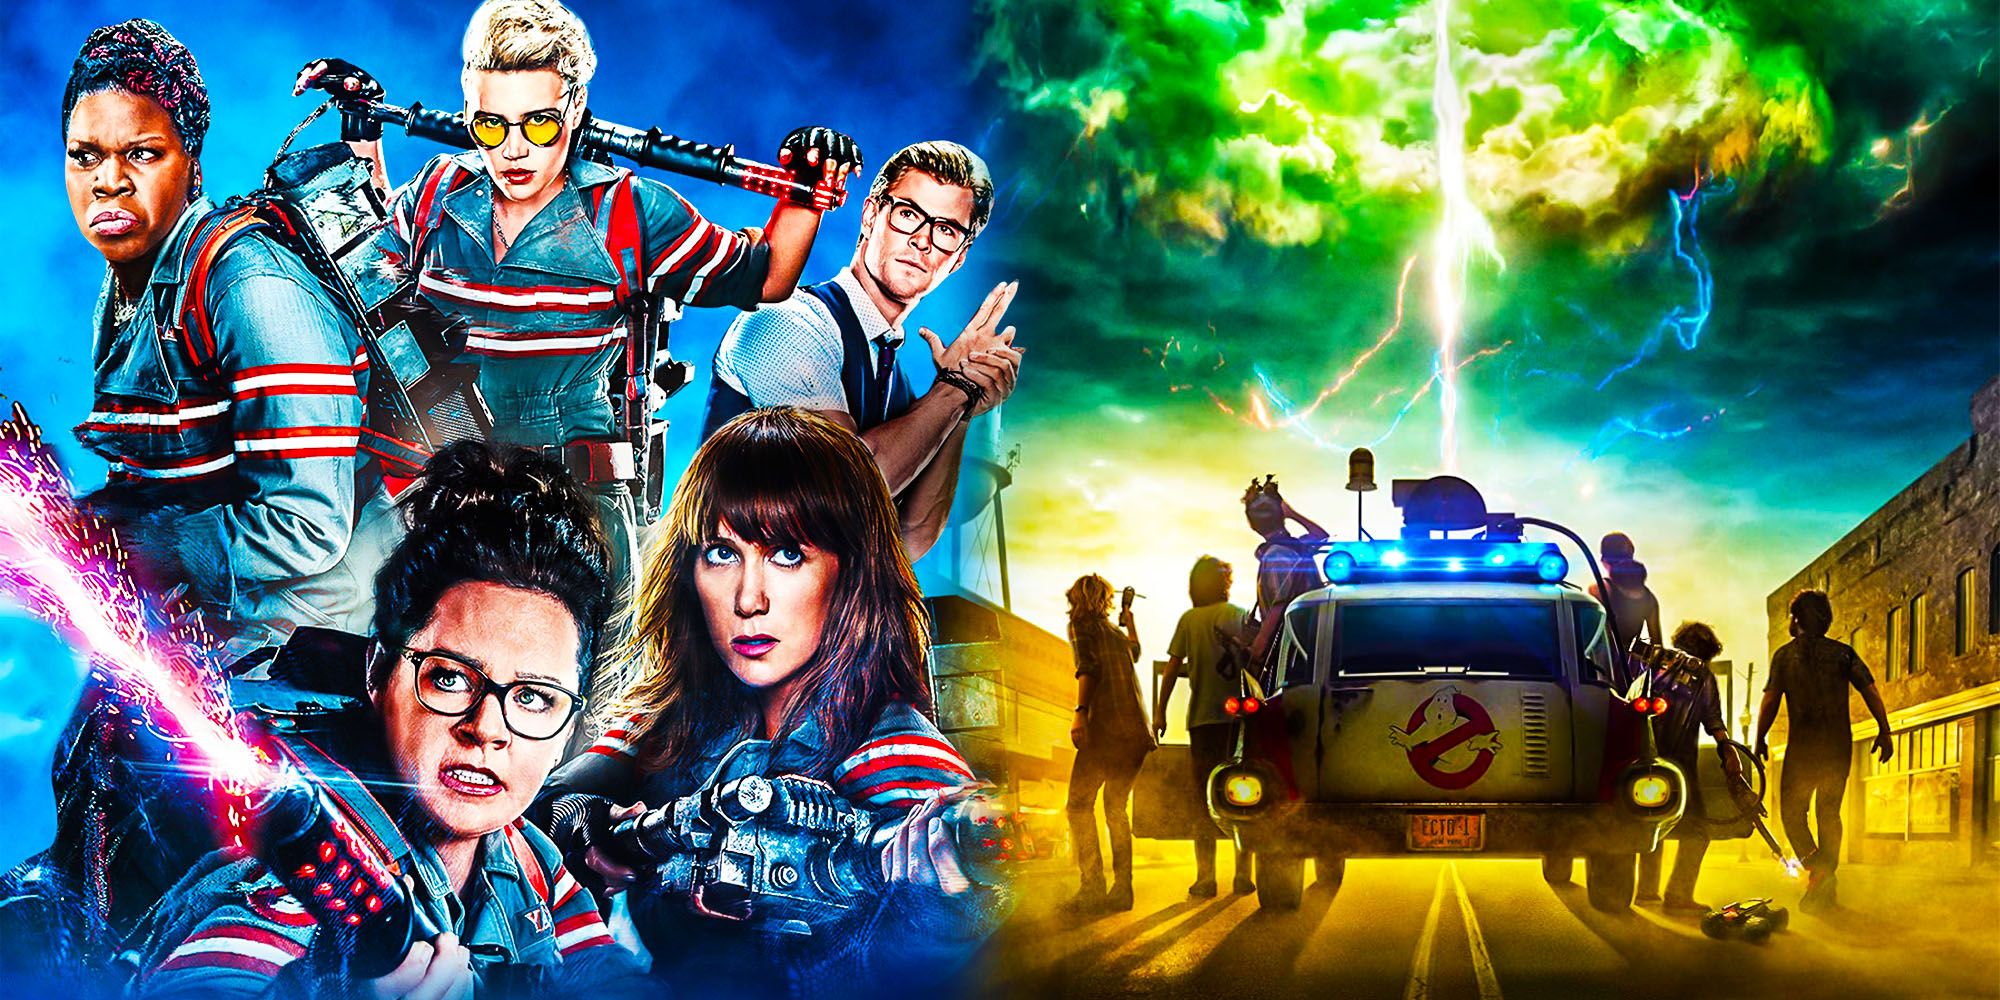 Ghostbusters 2016 reboot Ghostbuster afterlife reviews and box office